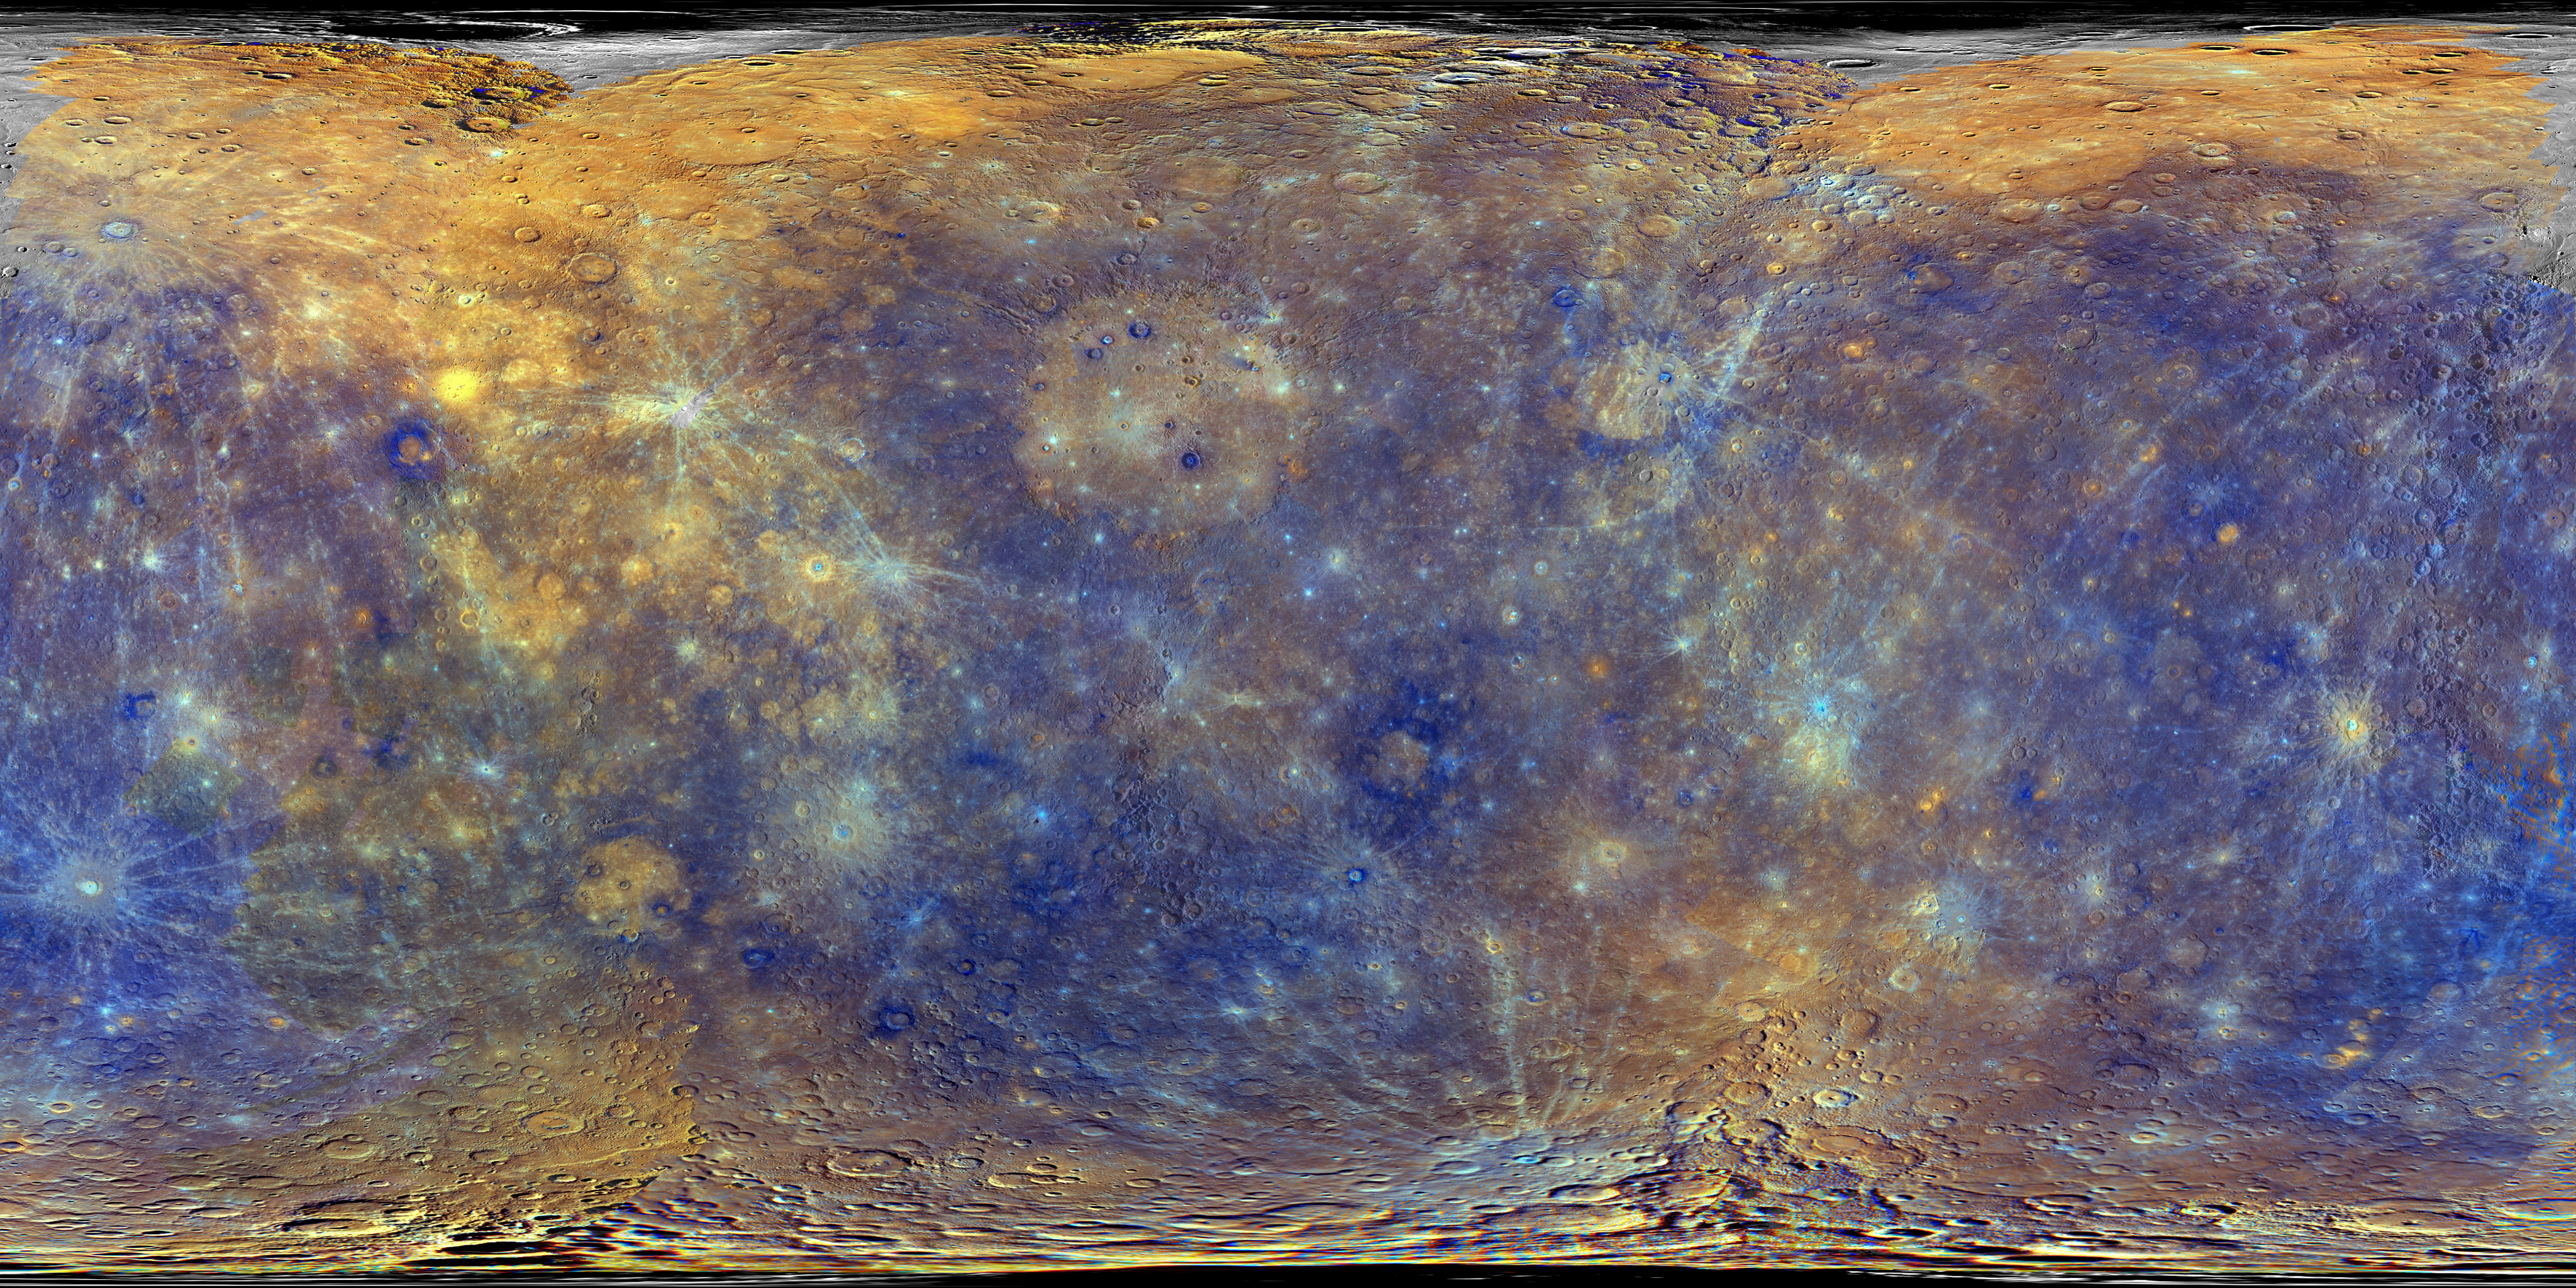 An enhanced color surface map of Mercury, produced from MESSENGER imagery.